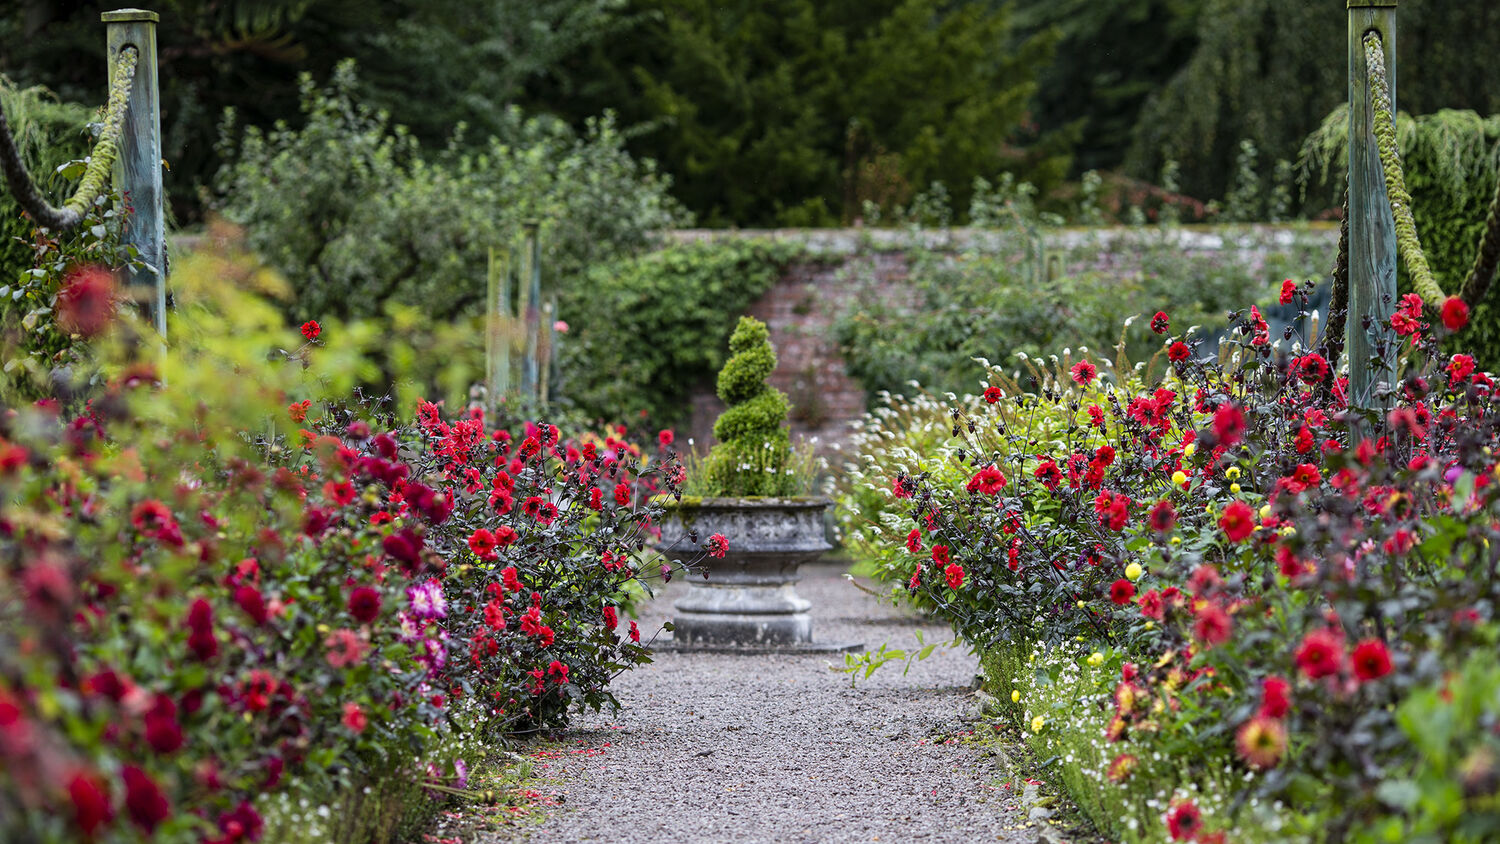 A gravel path leads through the centre of a walled garden, with colourful flower beds either side. A stone urn stands in the middle of the path a little way ahead. Wooden climbing supports stand in the bed.